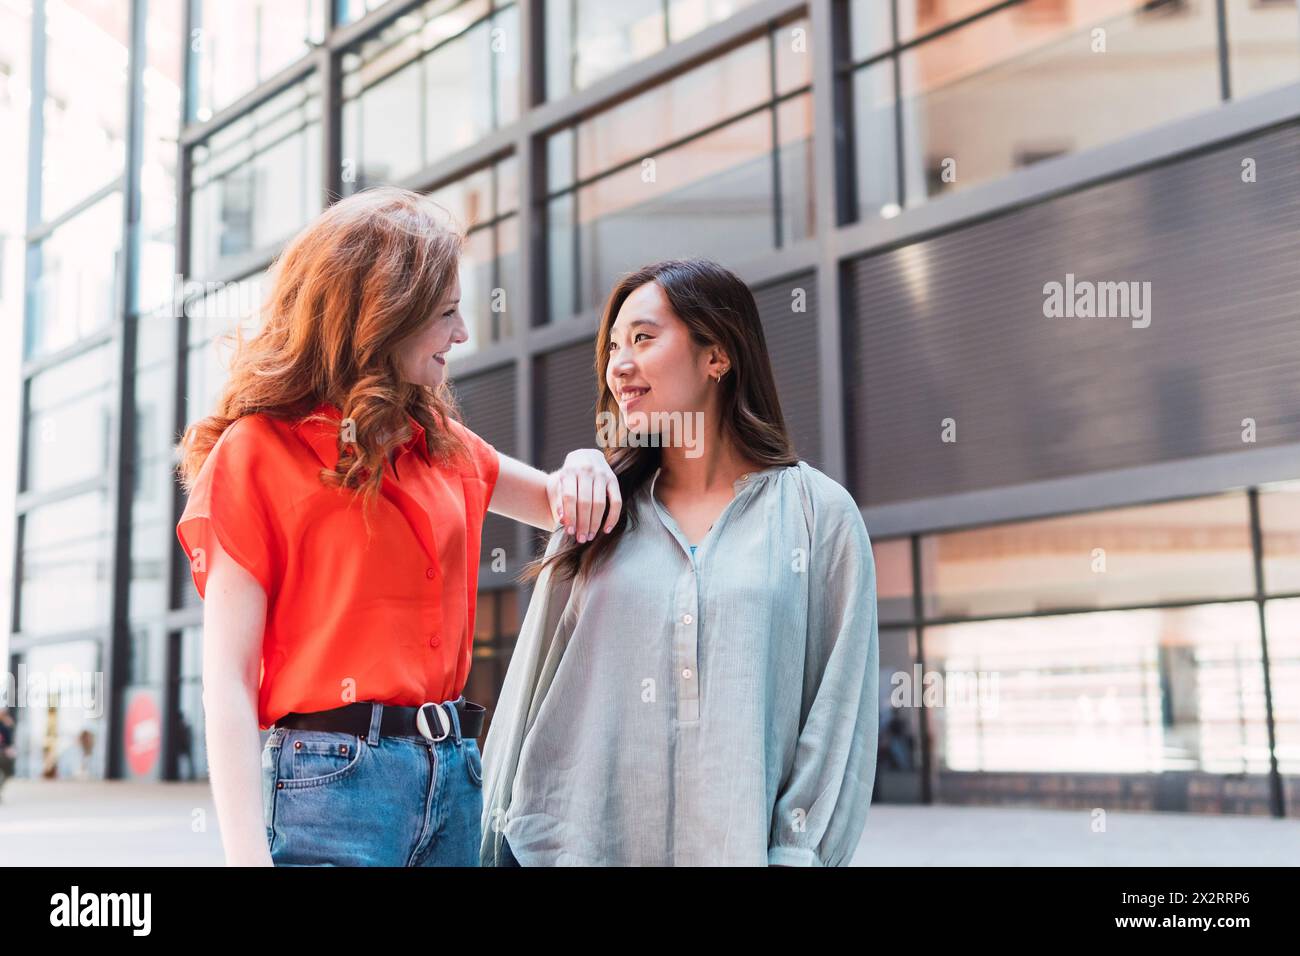 Smiling woman with hand on shoulder of friend near building Stock Photo